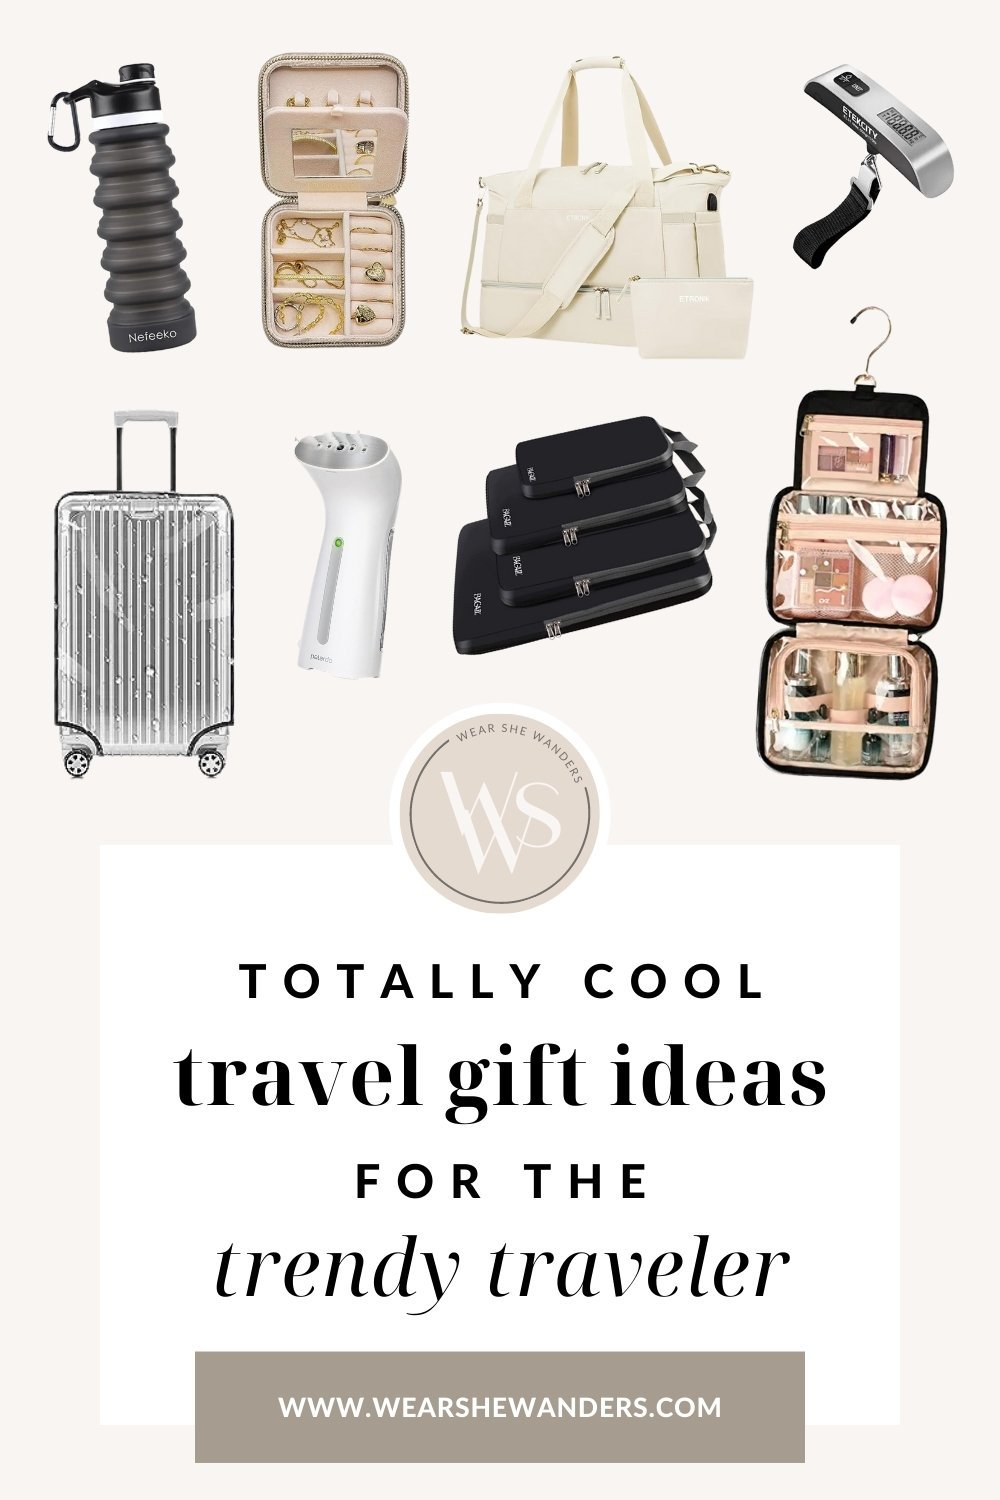 Best Travel Gifts For Women: Perfect Ways To Surprise Her